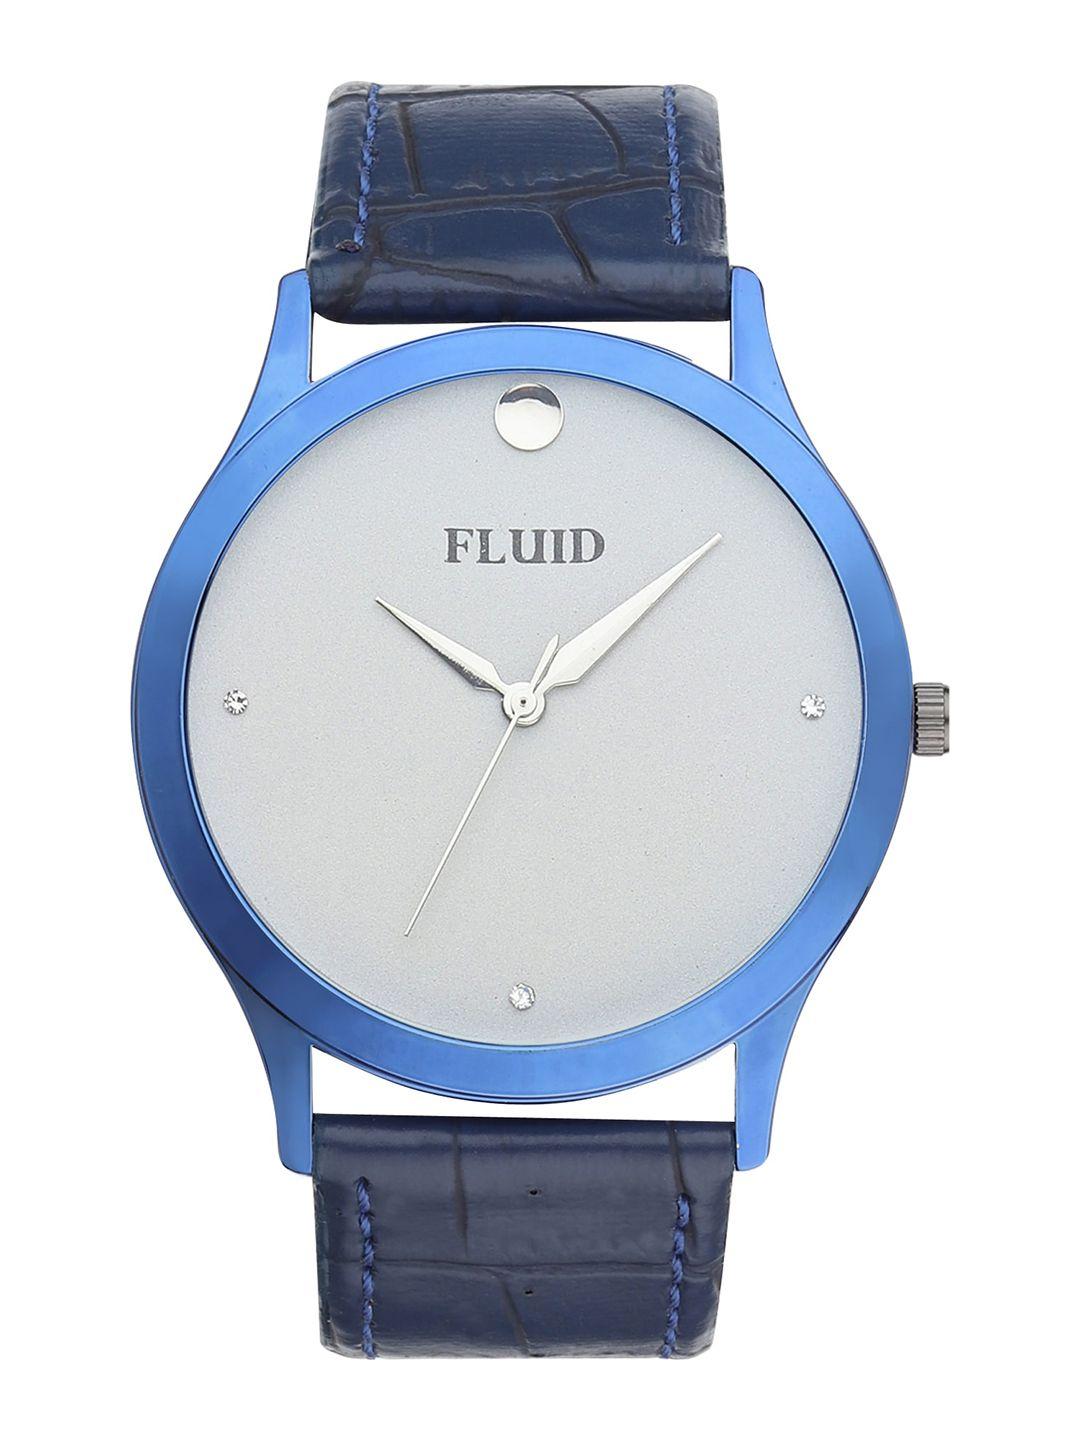 fluid men embellished dial & leather textured straps analogue watch fl23-787g-gry01